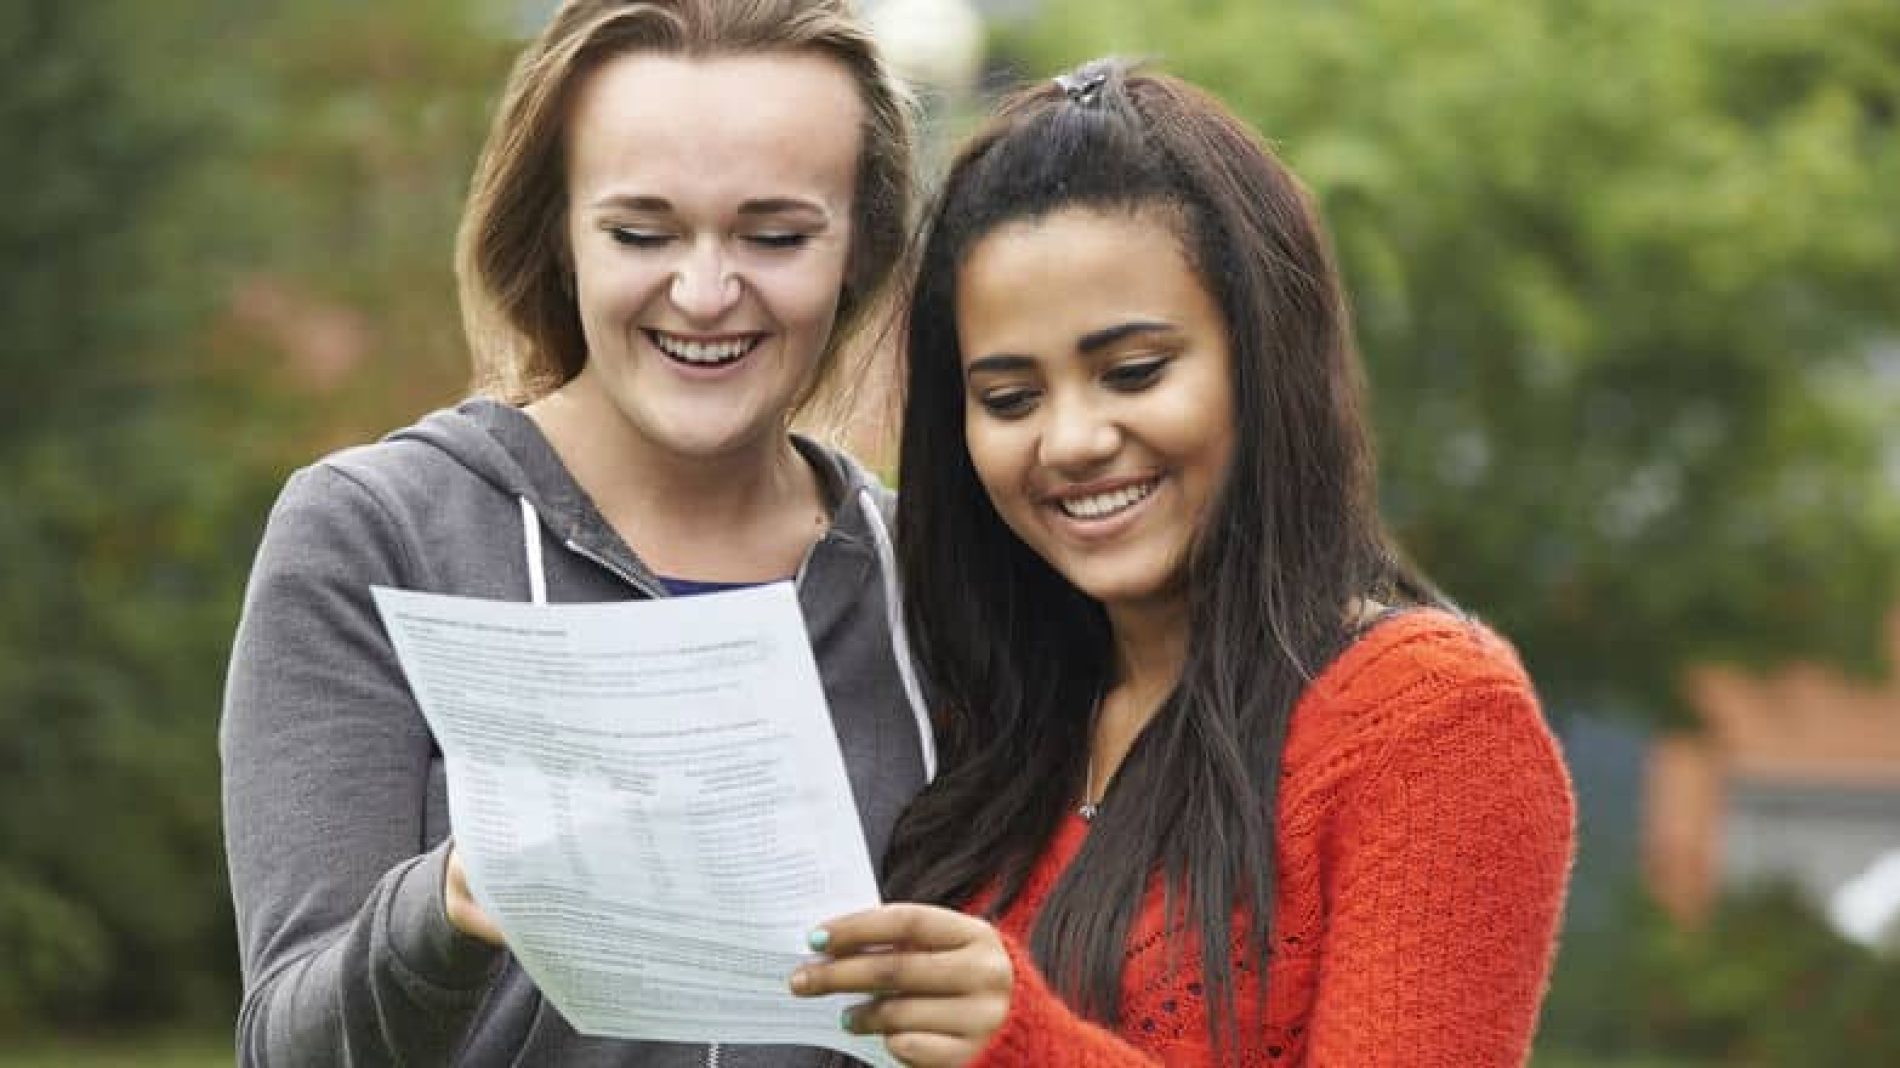 Our advice for anyone getting Leaving Cert results